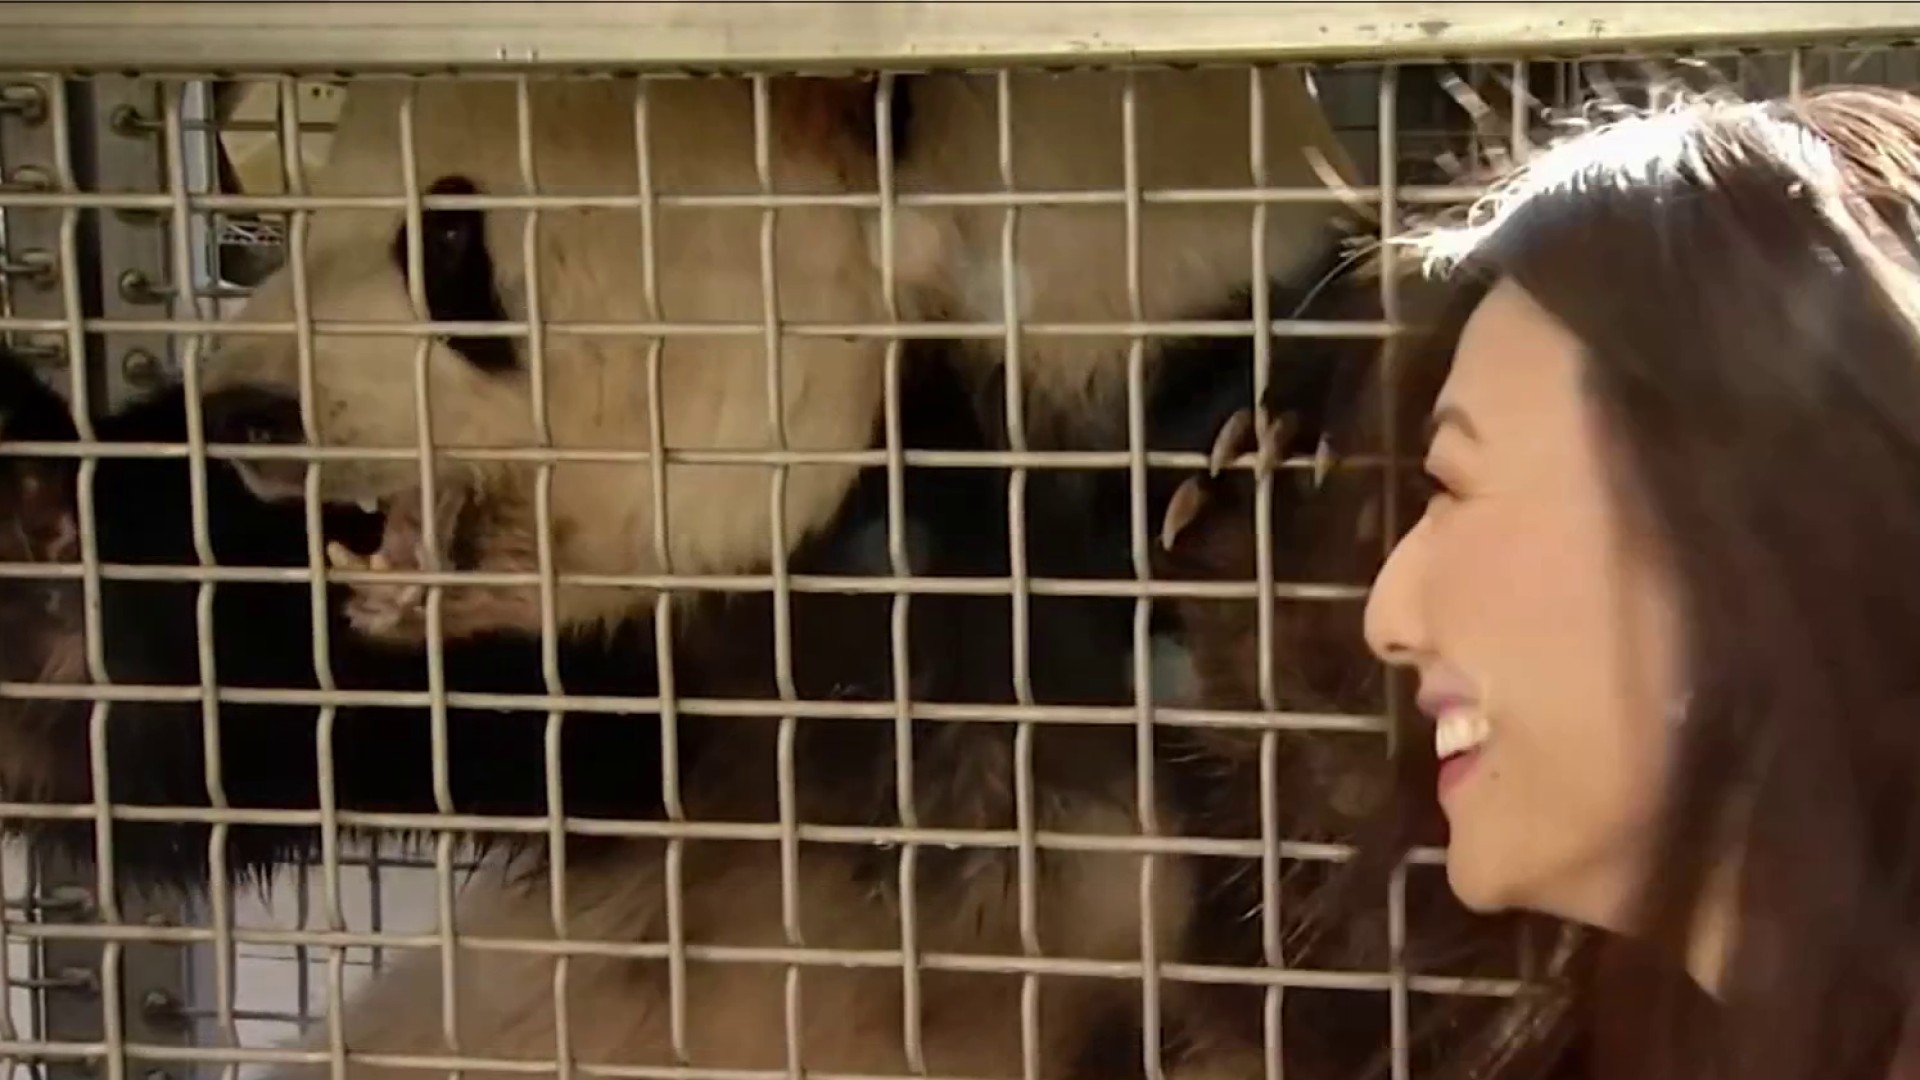 Why are the pandas at the National Zoo going back to China? – NBC4